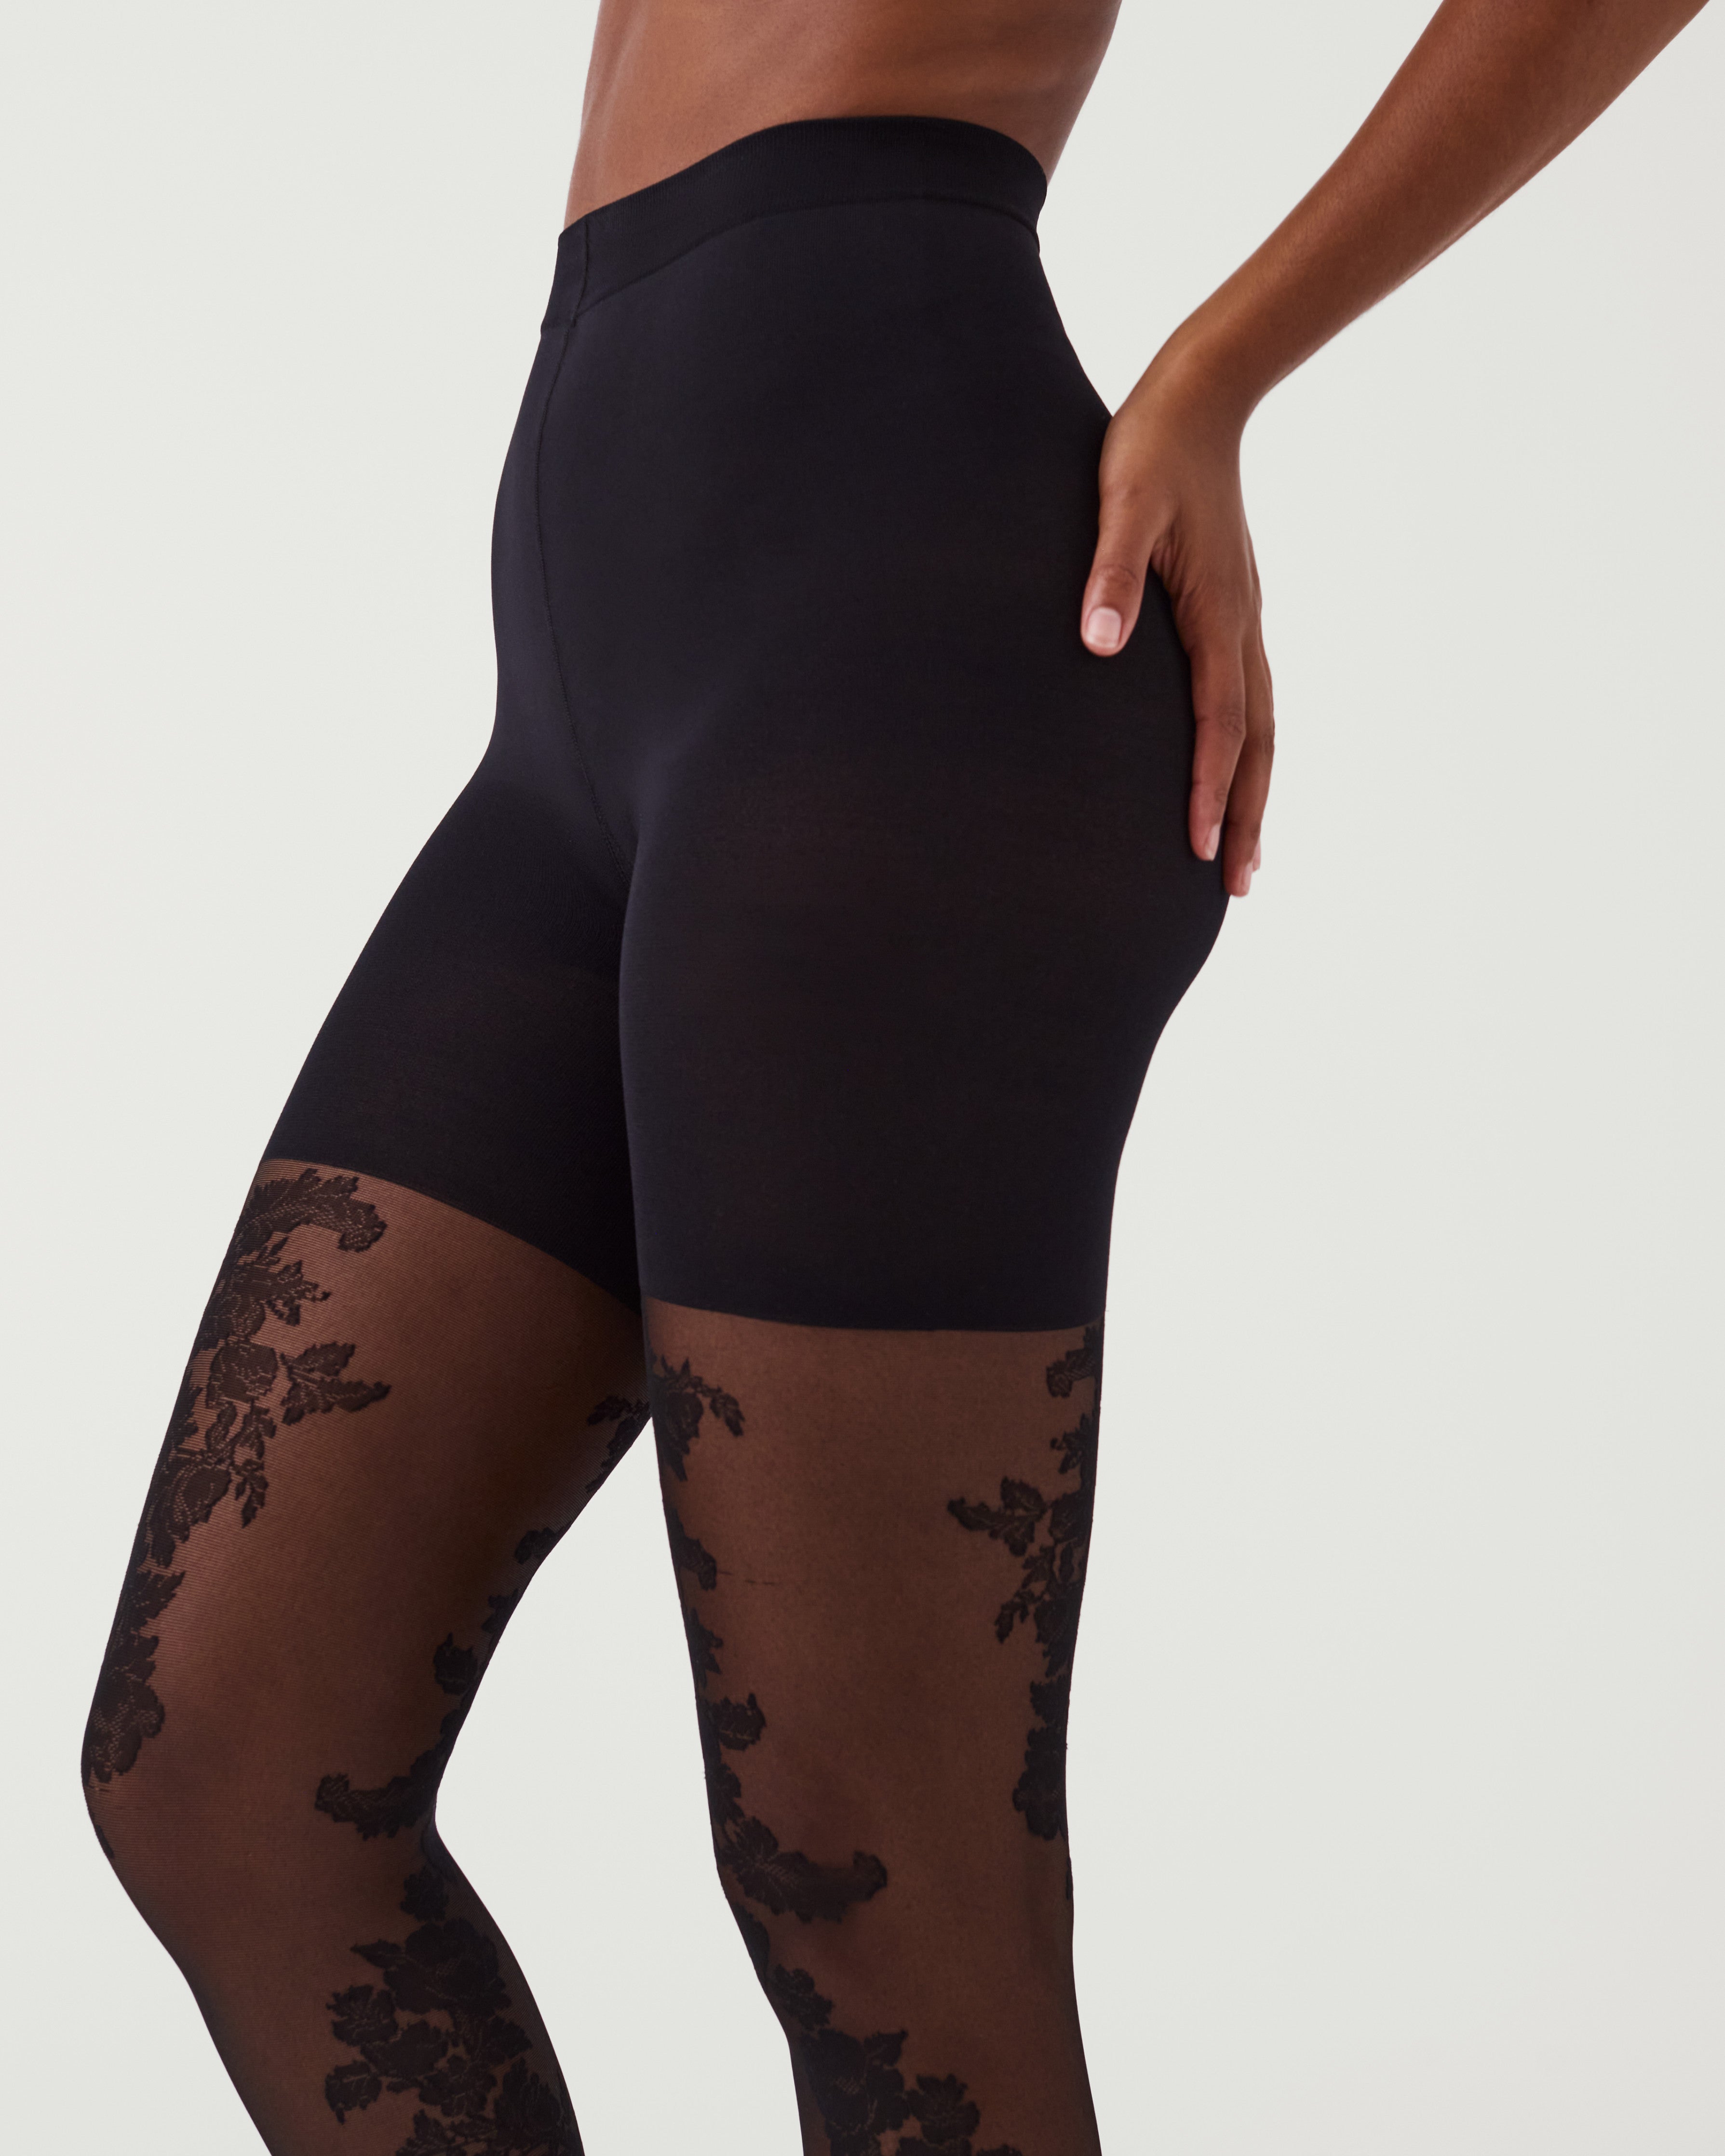 Spanx Women's High-Waisted Tight-End Tights